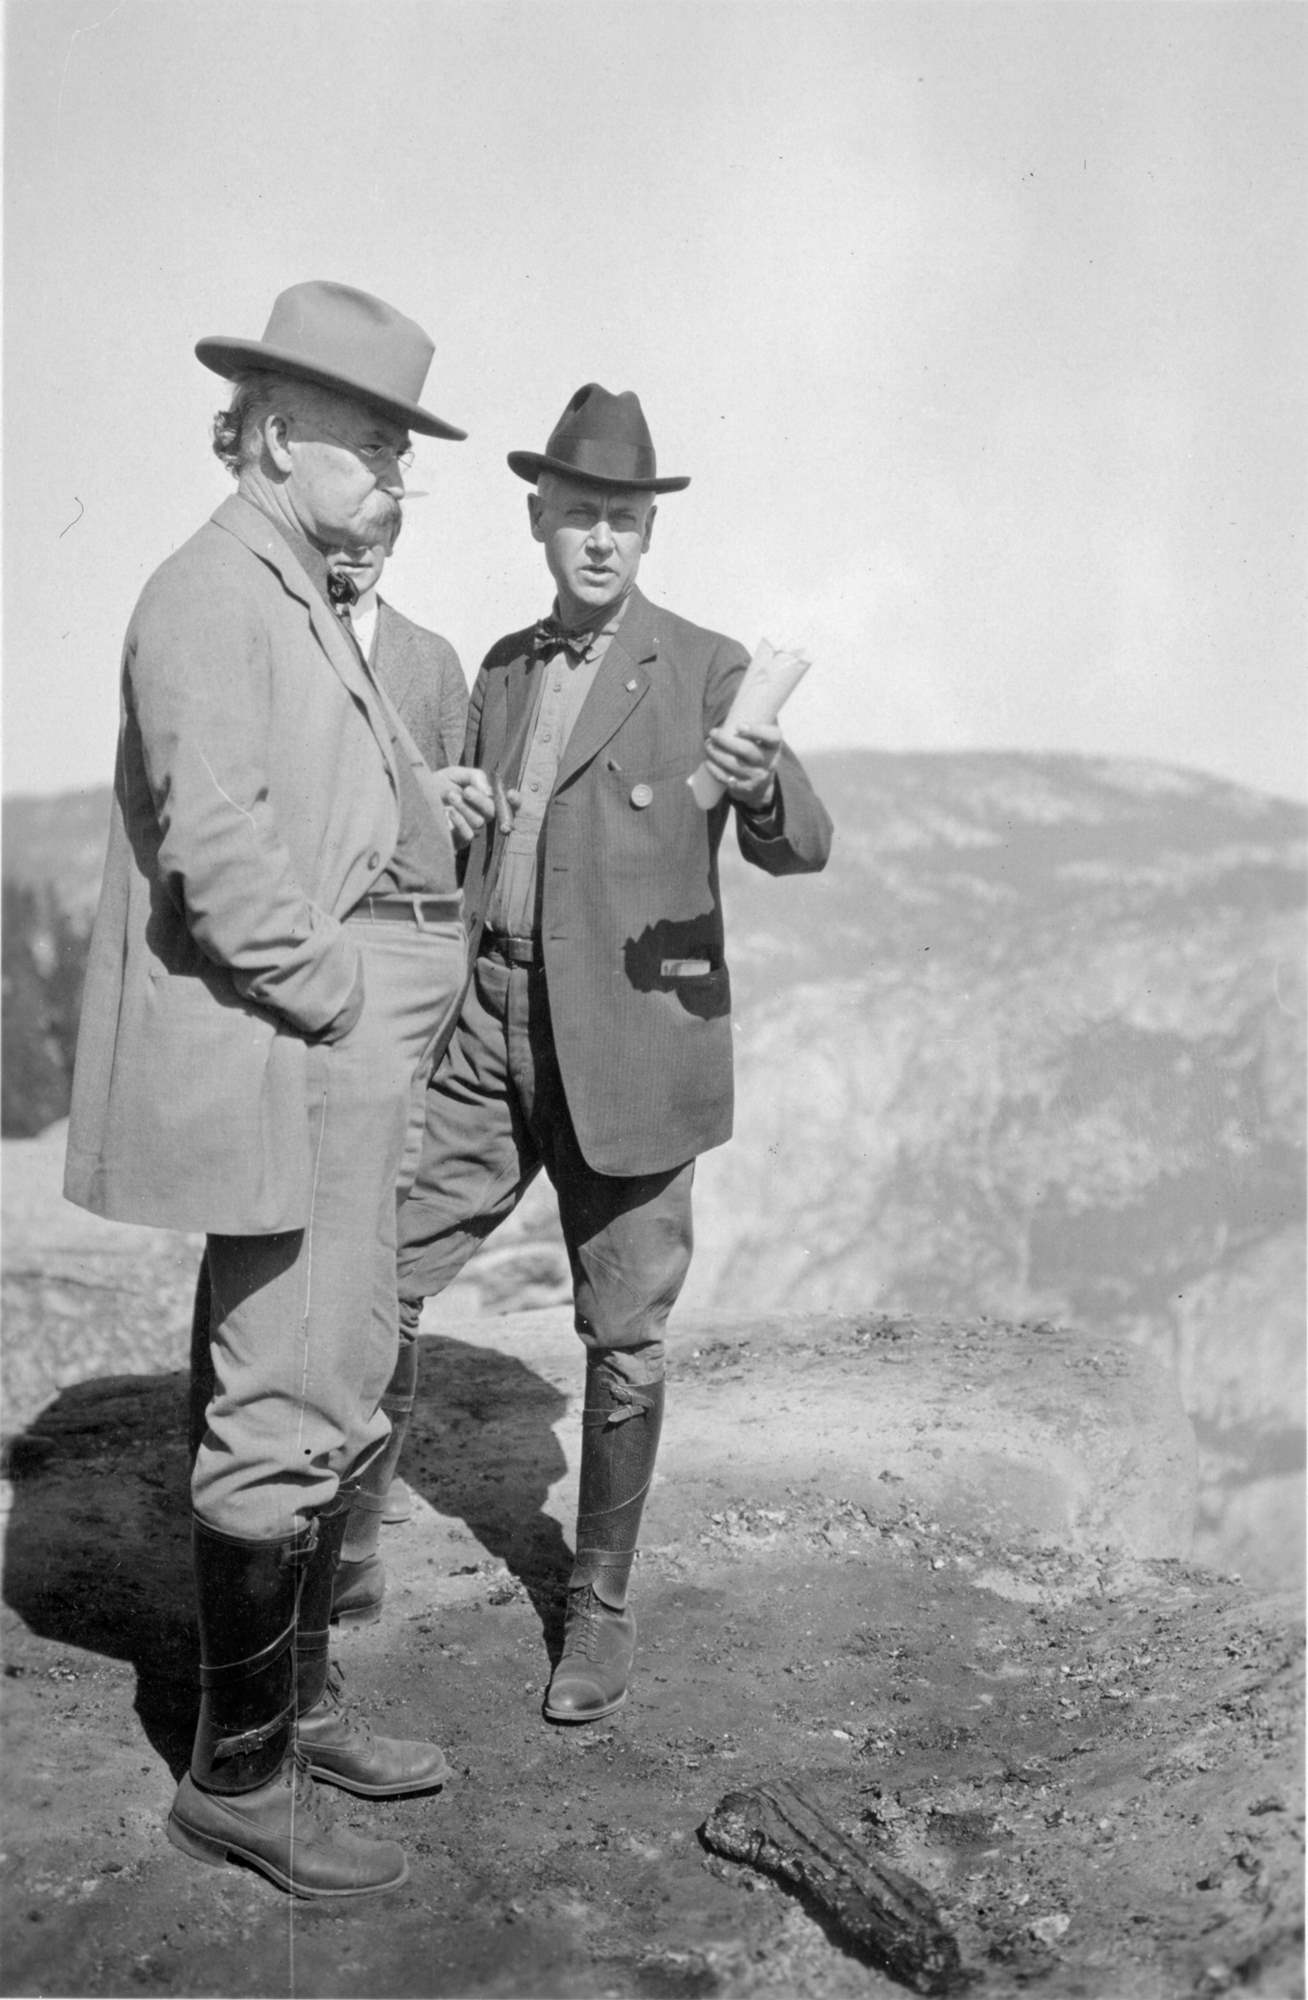 Director Stephen Mather, standing with two men, wears breeches, shoes, puttees, shirt, bow tie, dark cowboy hat, and a round badge on his coat.